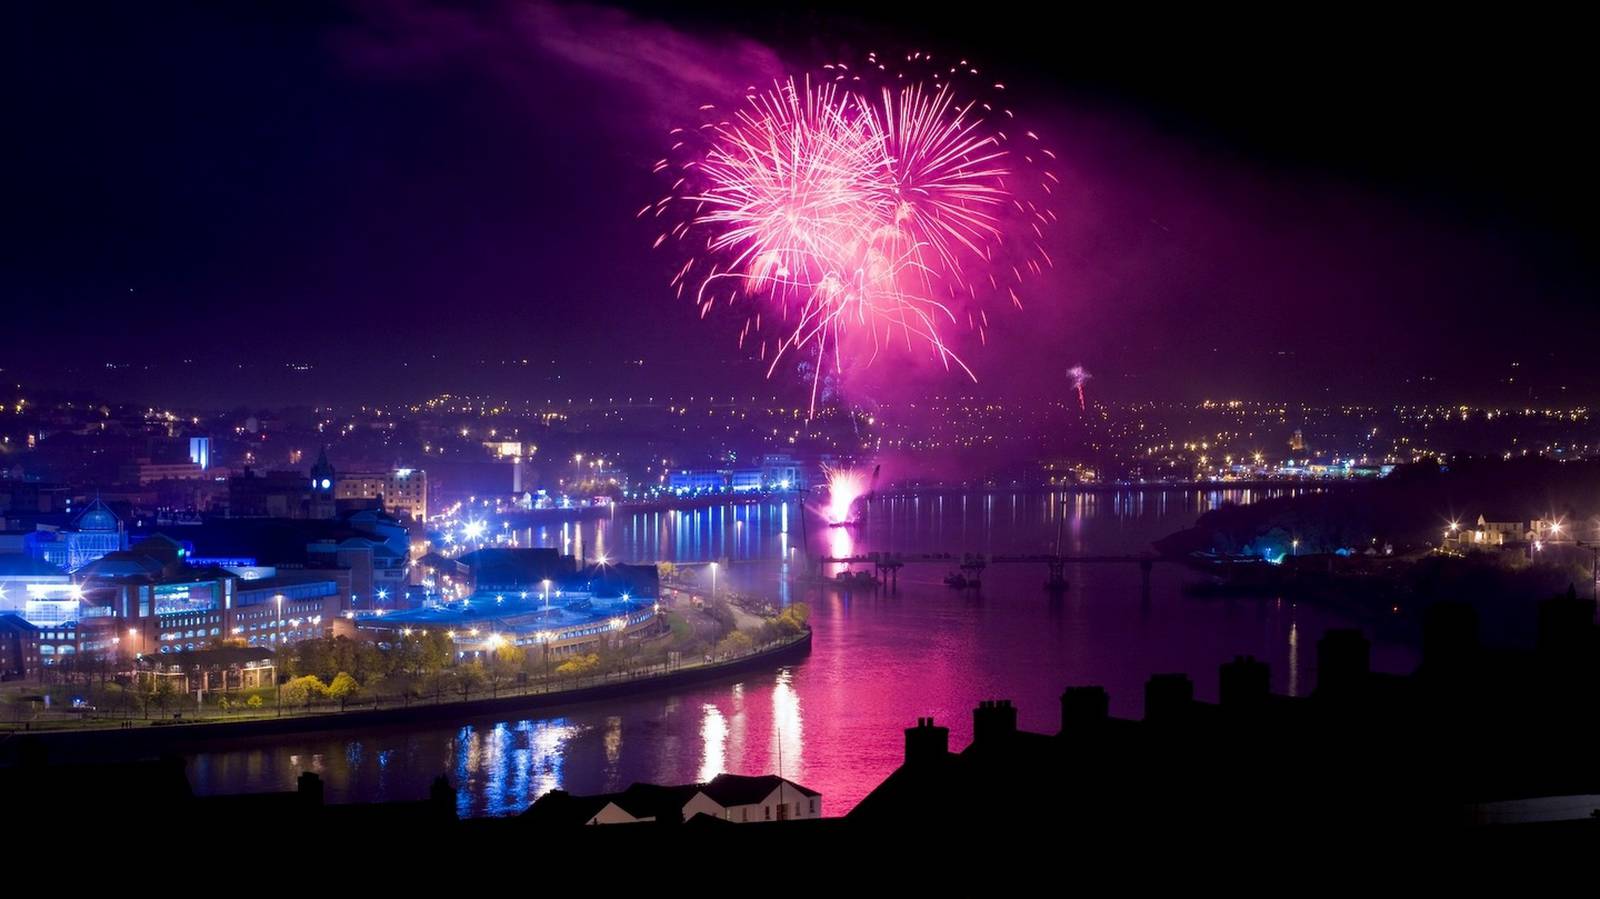 Fireworks to provide finale this evening at Derry Halloween Festival